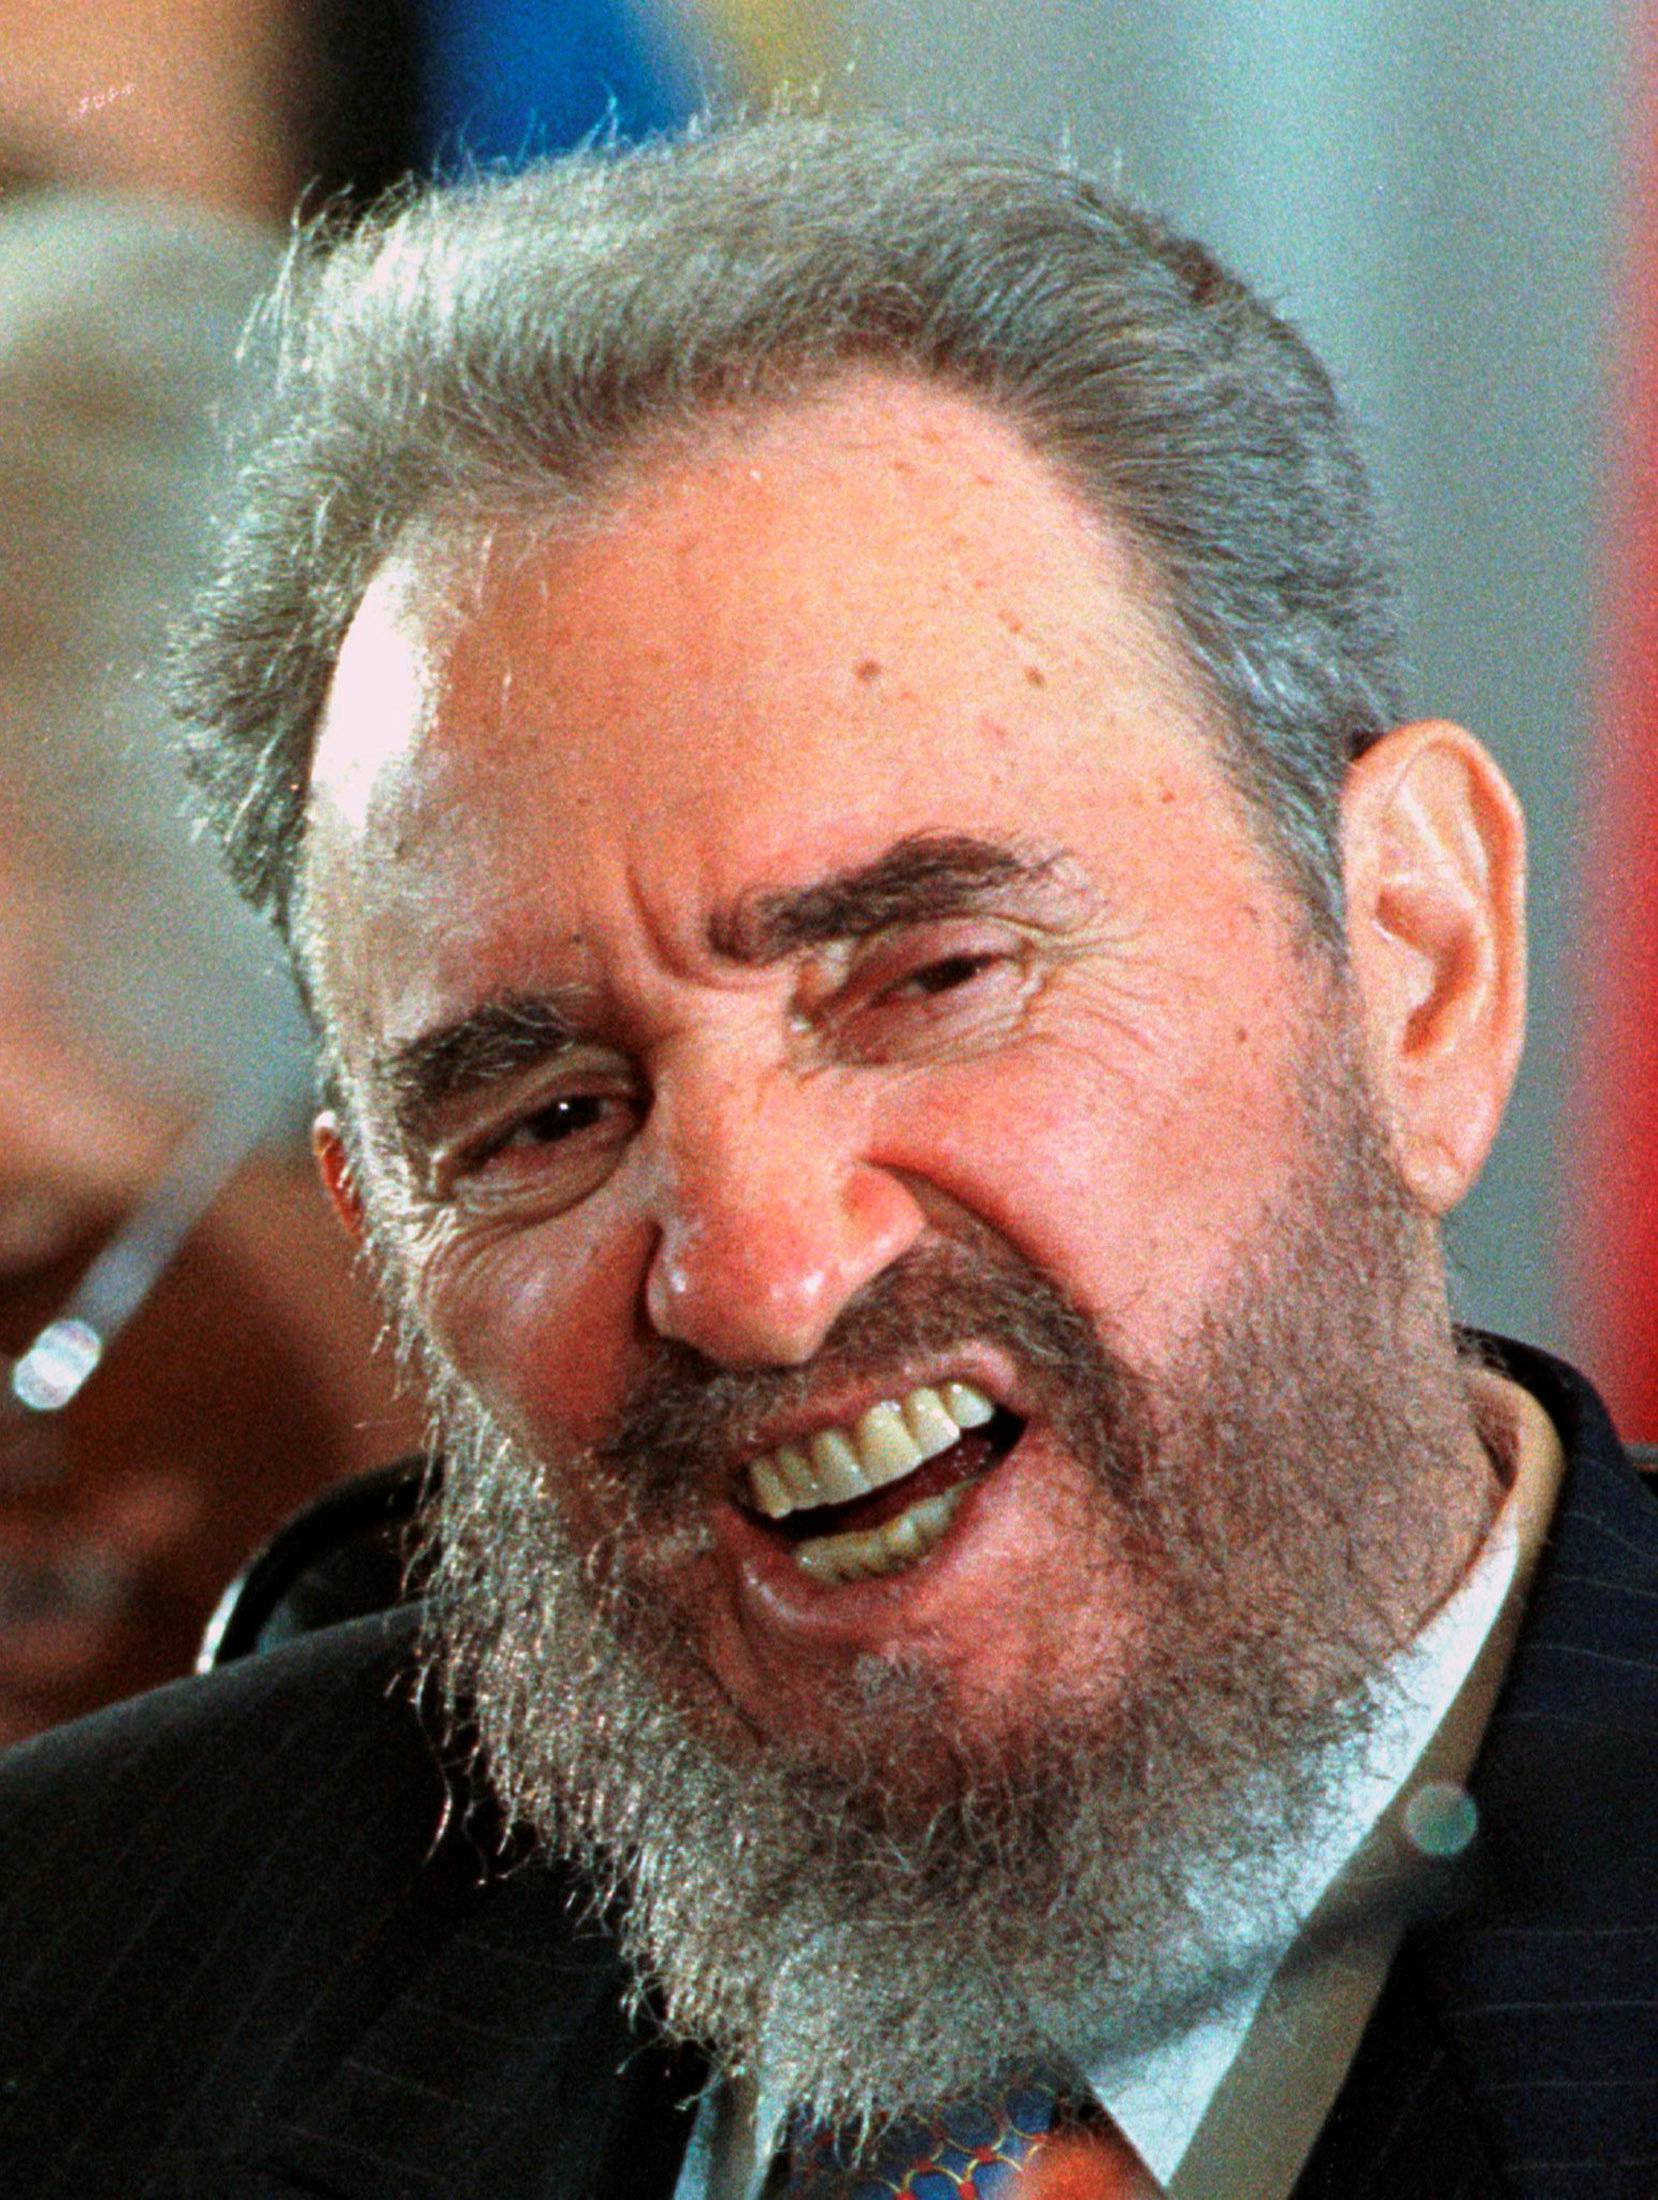 File photo of then Cuban President Fidel Castro fighting a yawn on the first day of the VII Ibero-American summit on Margarita Island